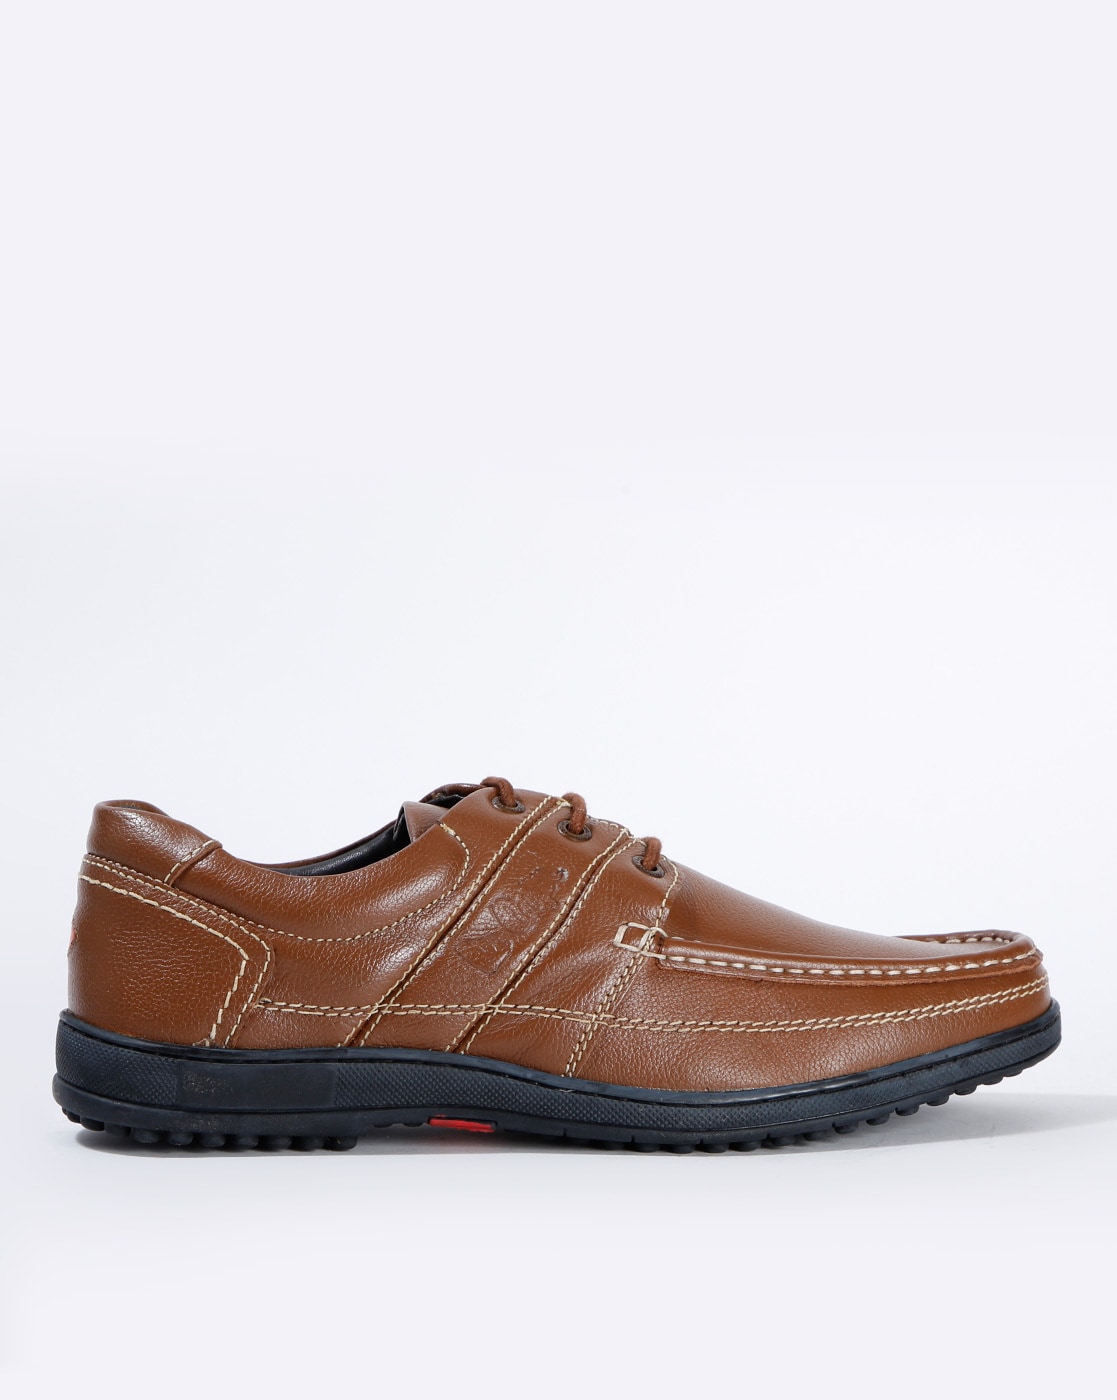 lee cooper lace up casual shoes